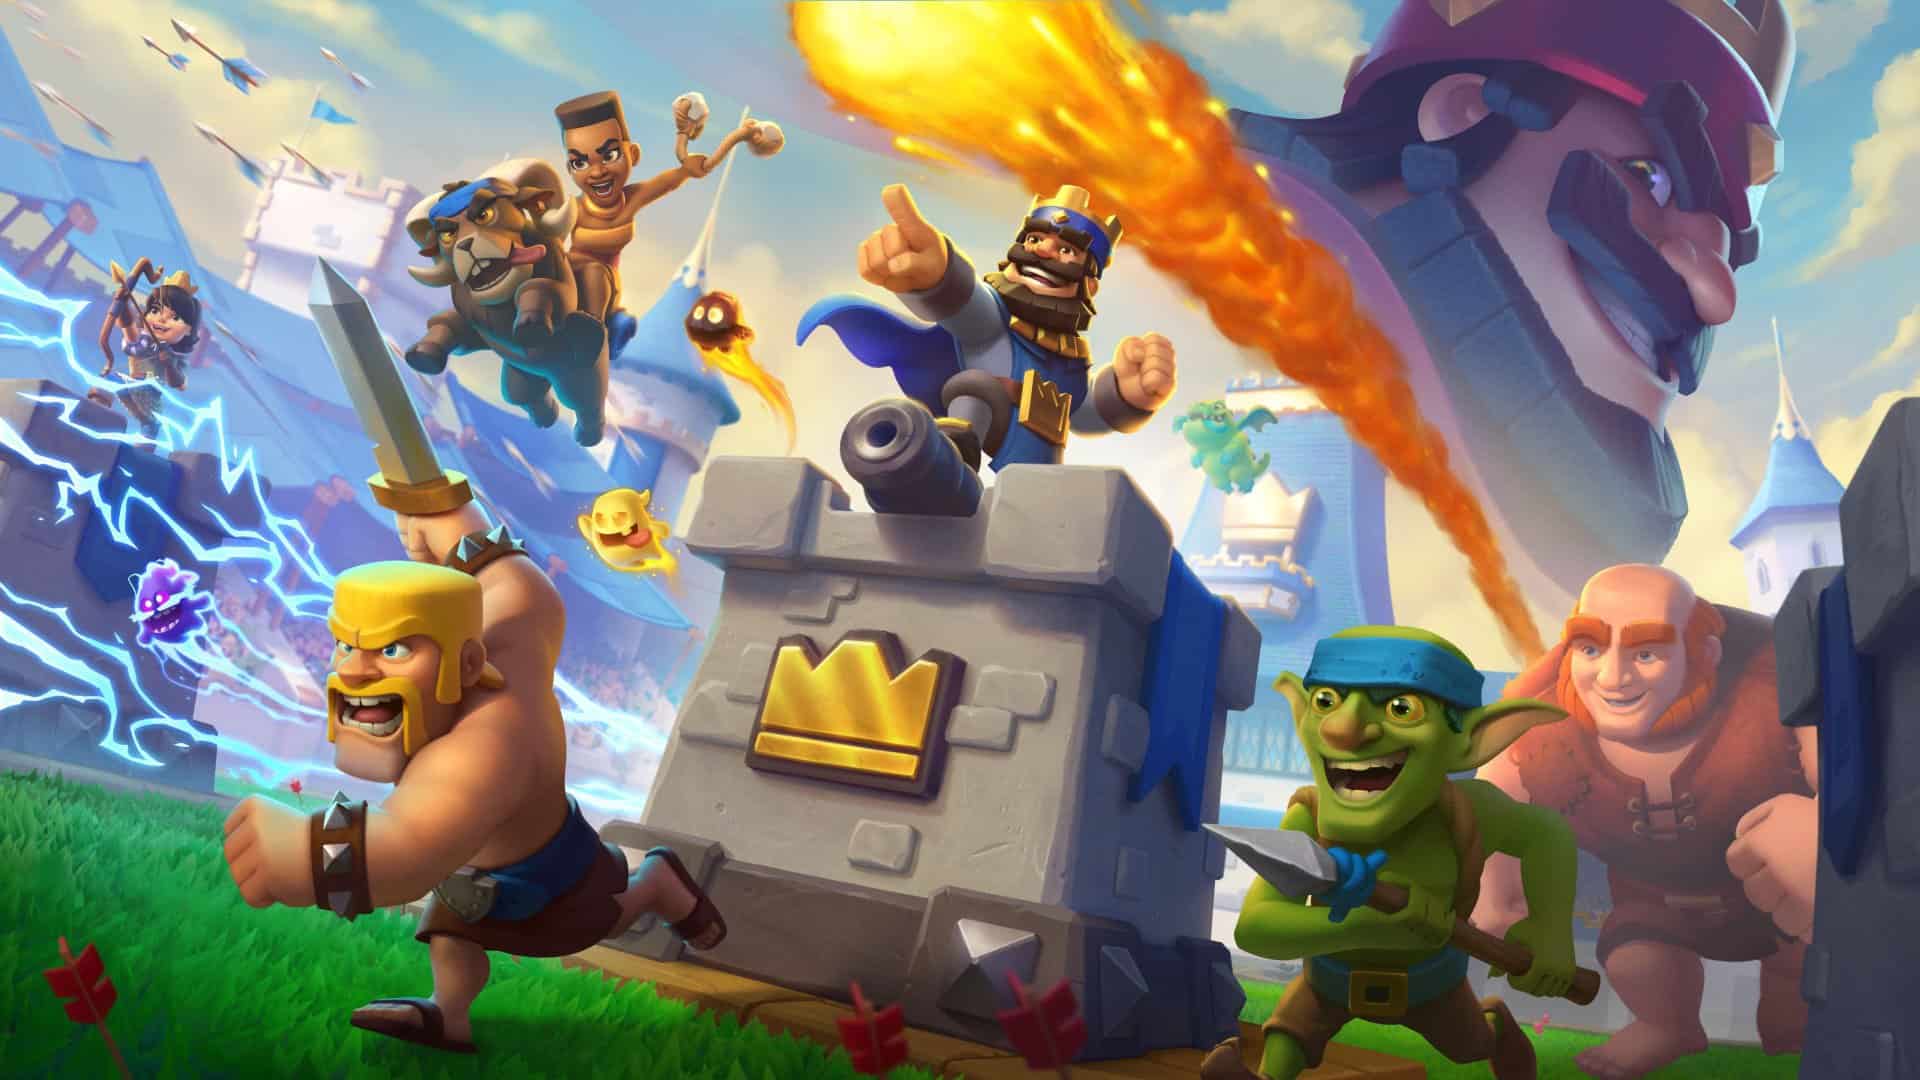 Clash Royale Stuck on News Royale Screen – How to Fix